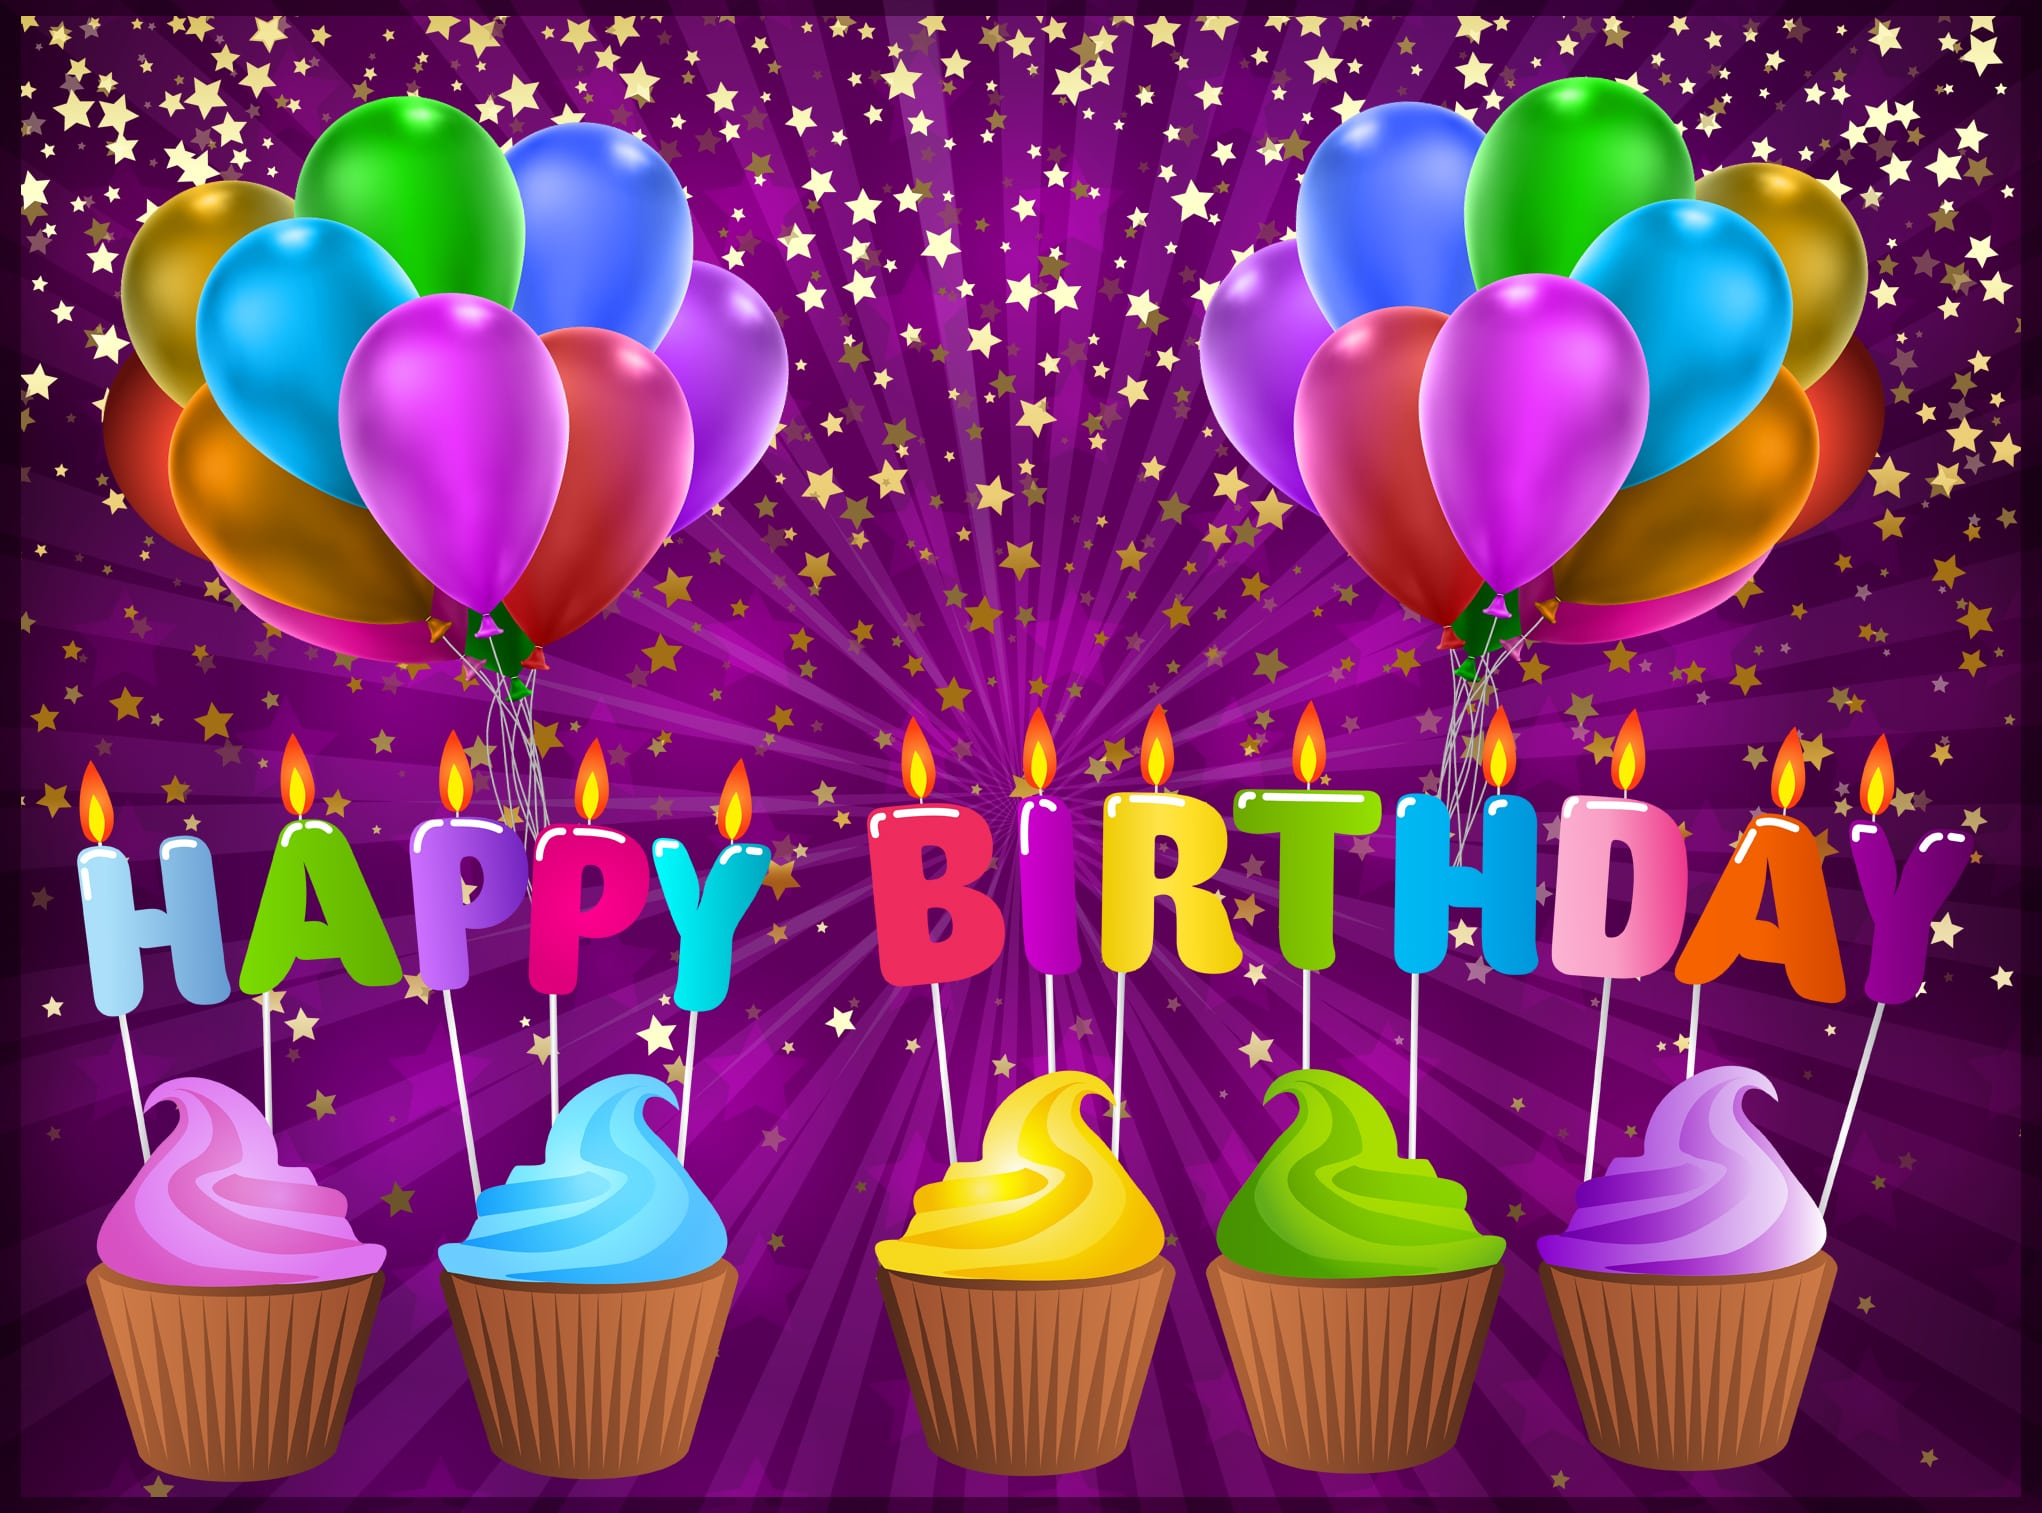 happy-birthday-greeting-cards-free-birthday-cards-download-free